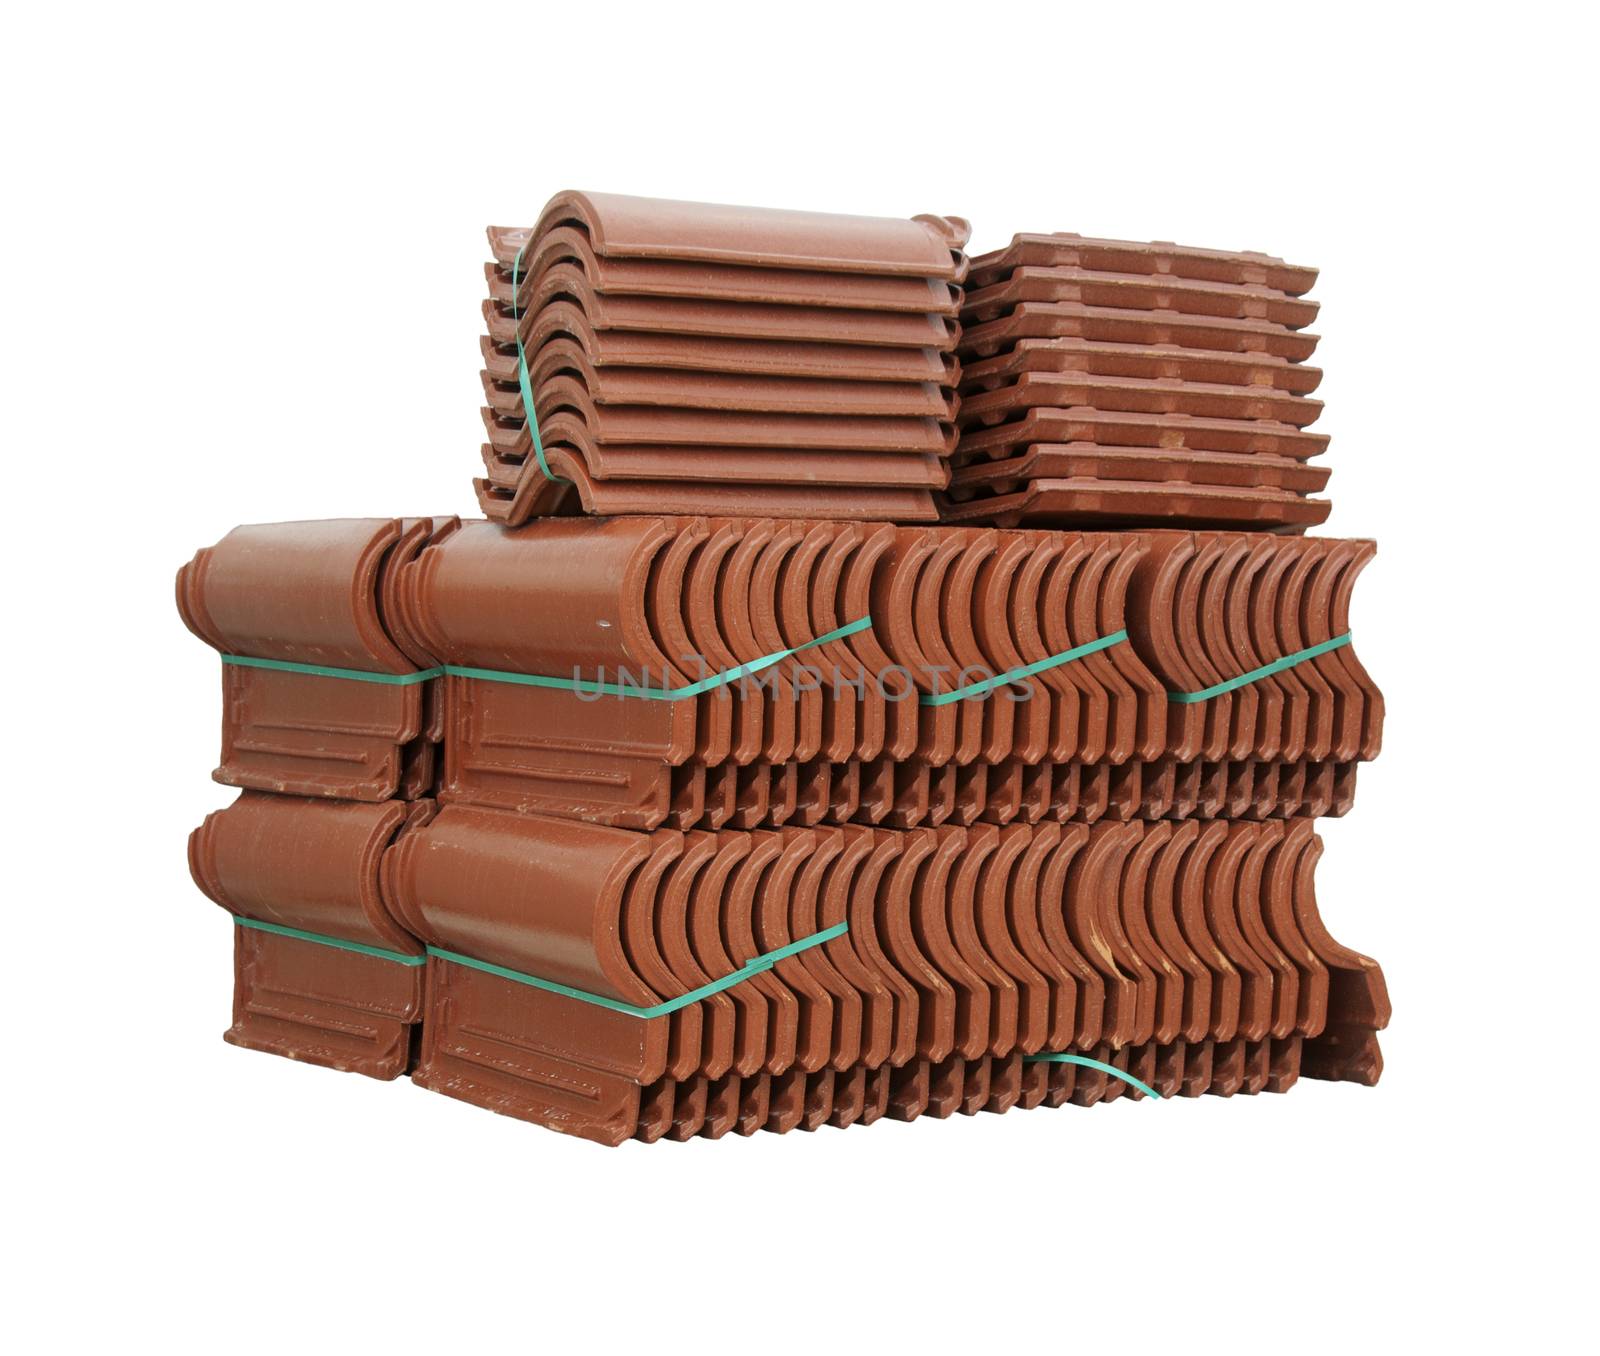 Pile of roofing tiles packaged. Isolated on white